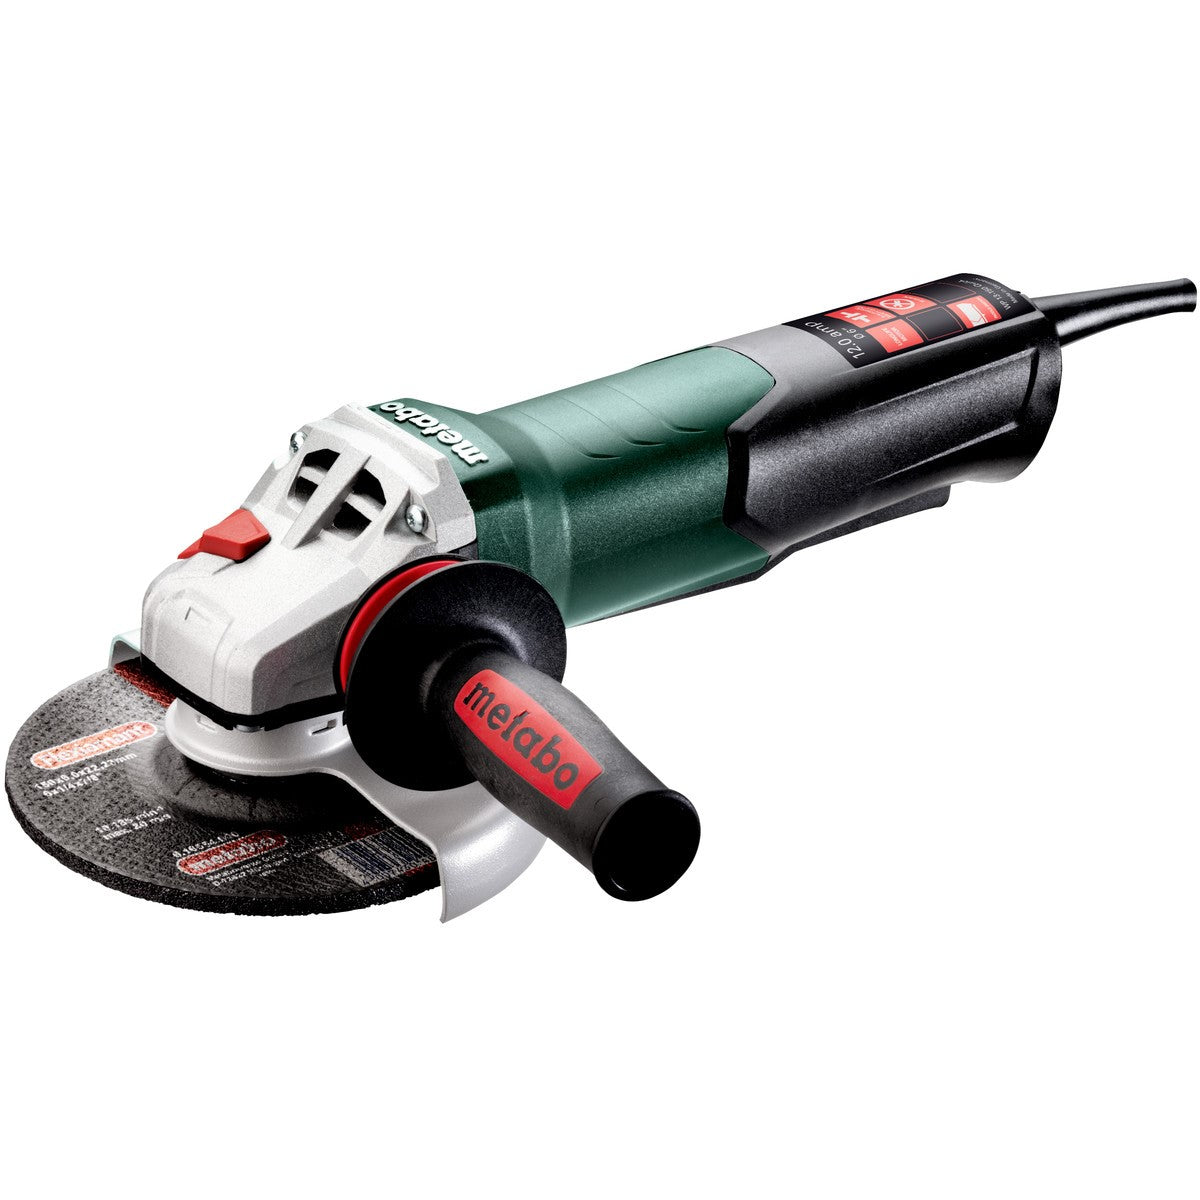 Metabo (603633420) 6 inch Angle Grinder wNonLock Paddle Switch 12 Amp image 1 of 4